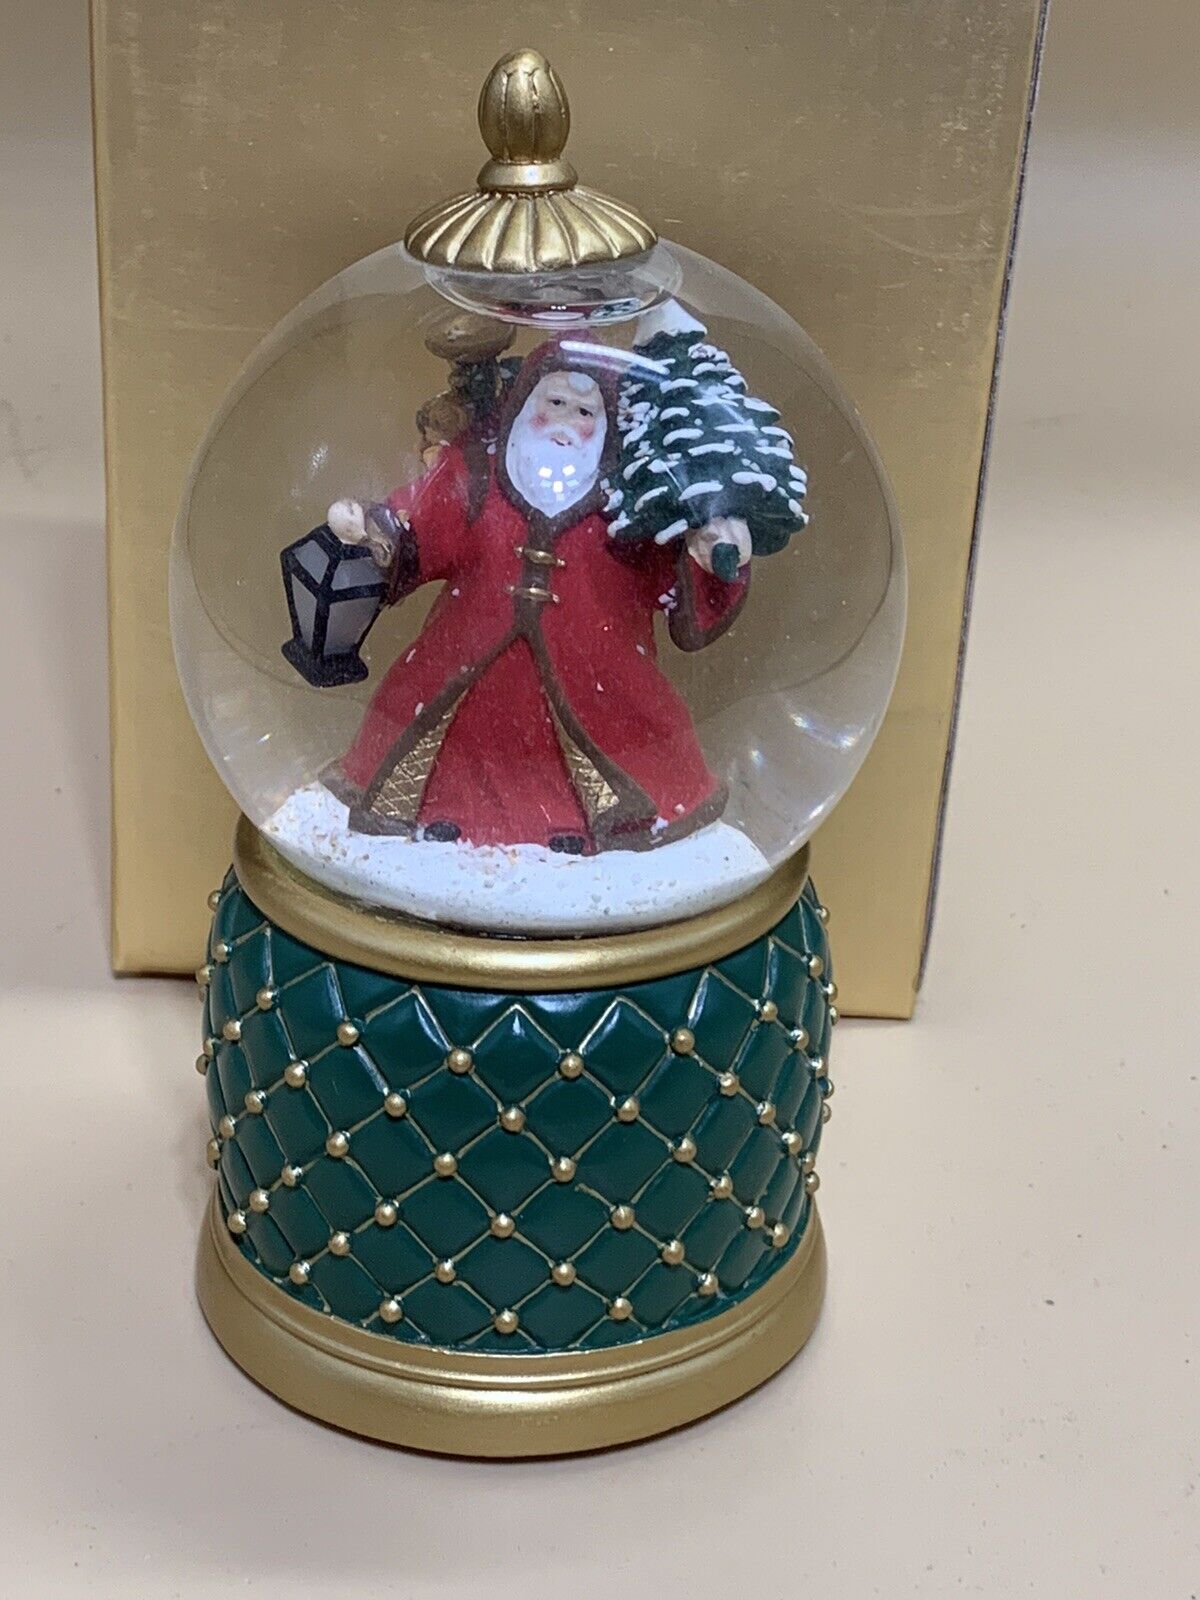 VERY PRETTY MR CHRISTMAS SNOW GLOBE THAT LIGHTS UP AND PLAYS MUSIC